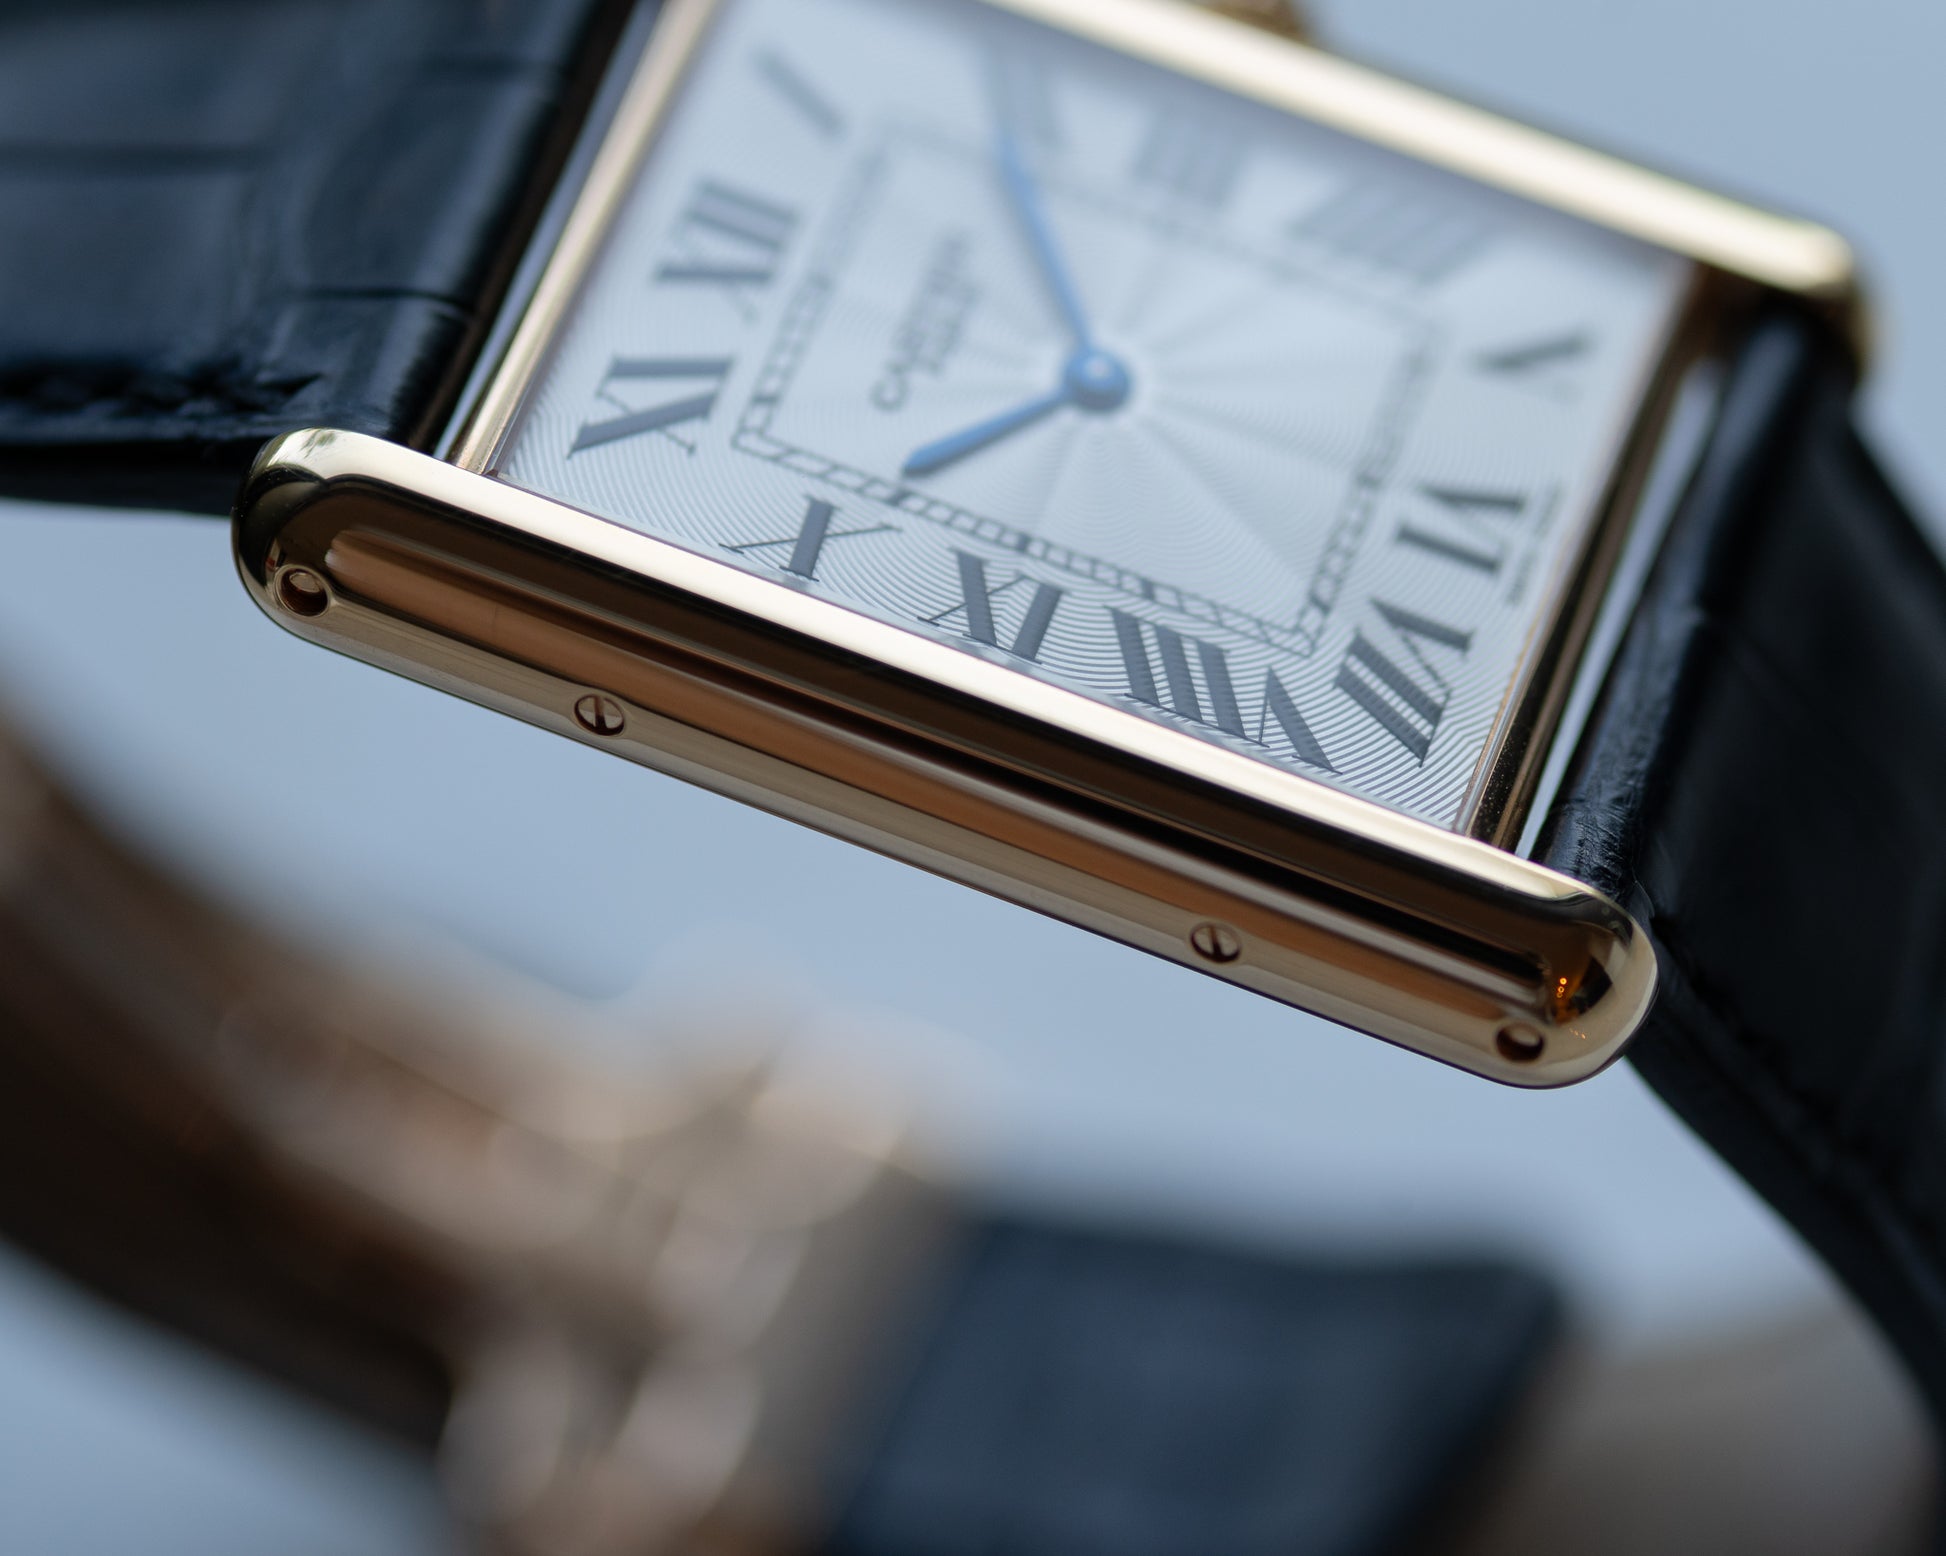 Cartier Tank XL Rose Gold CPCP - full set – Special Dial